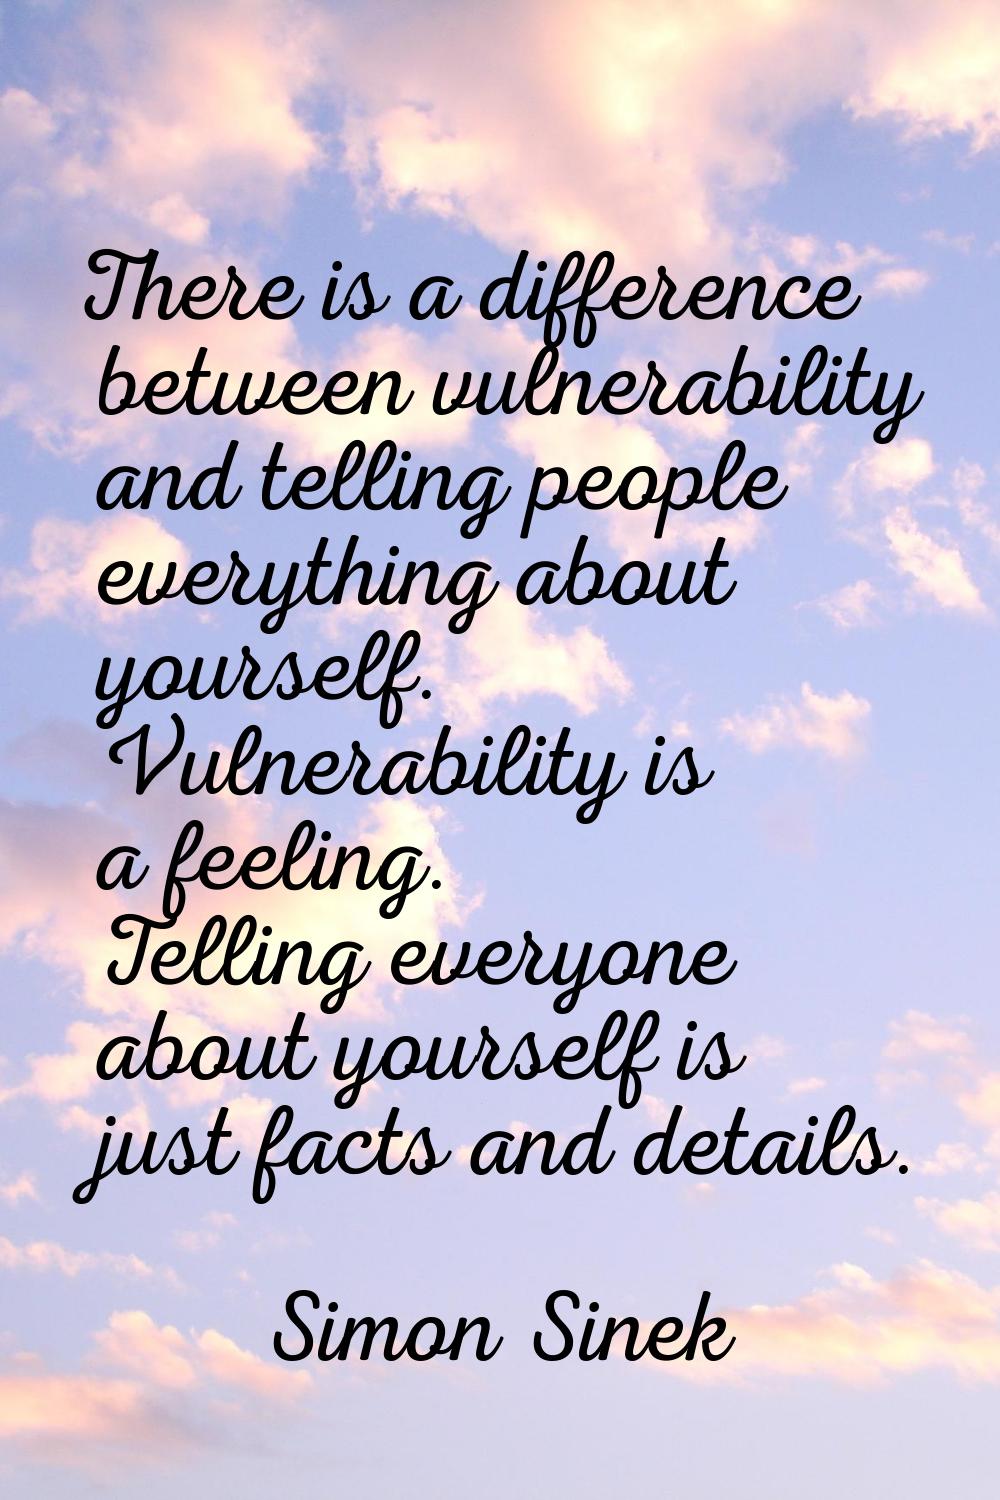 There is a difference between vulnerability and telling people everything about yourself. Vulnerabi